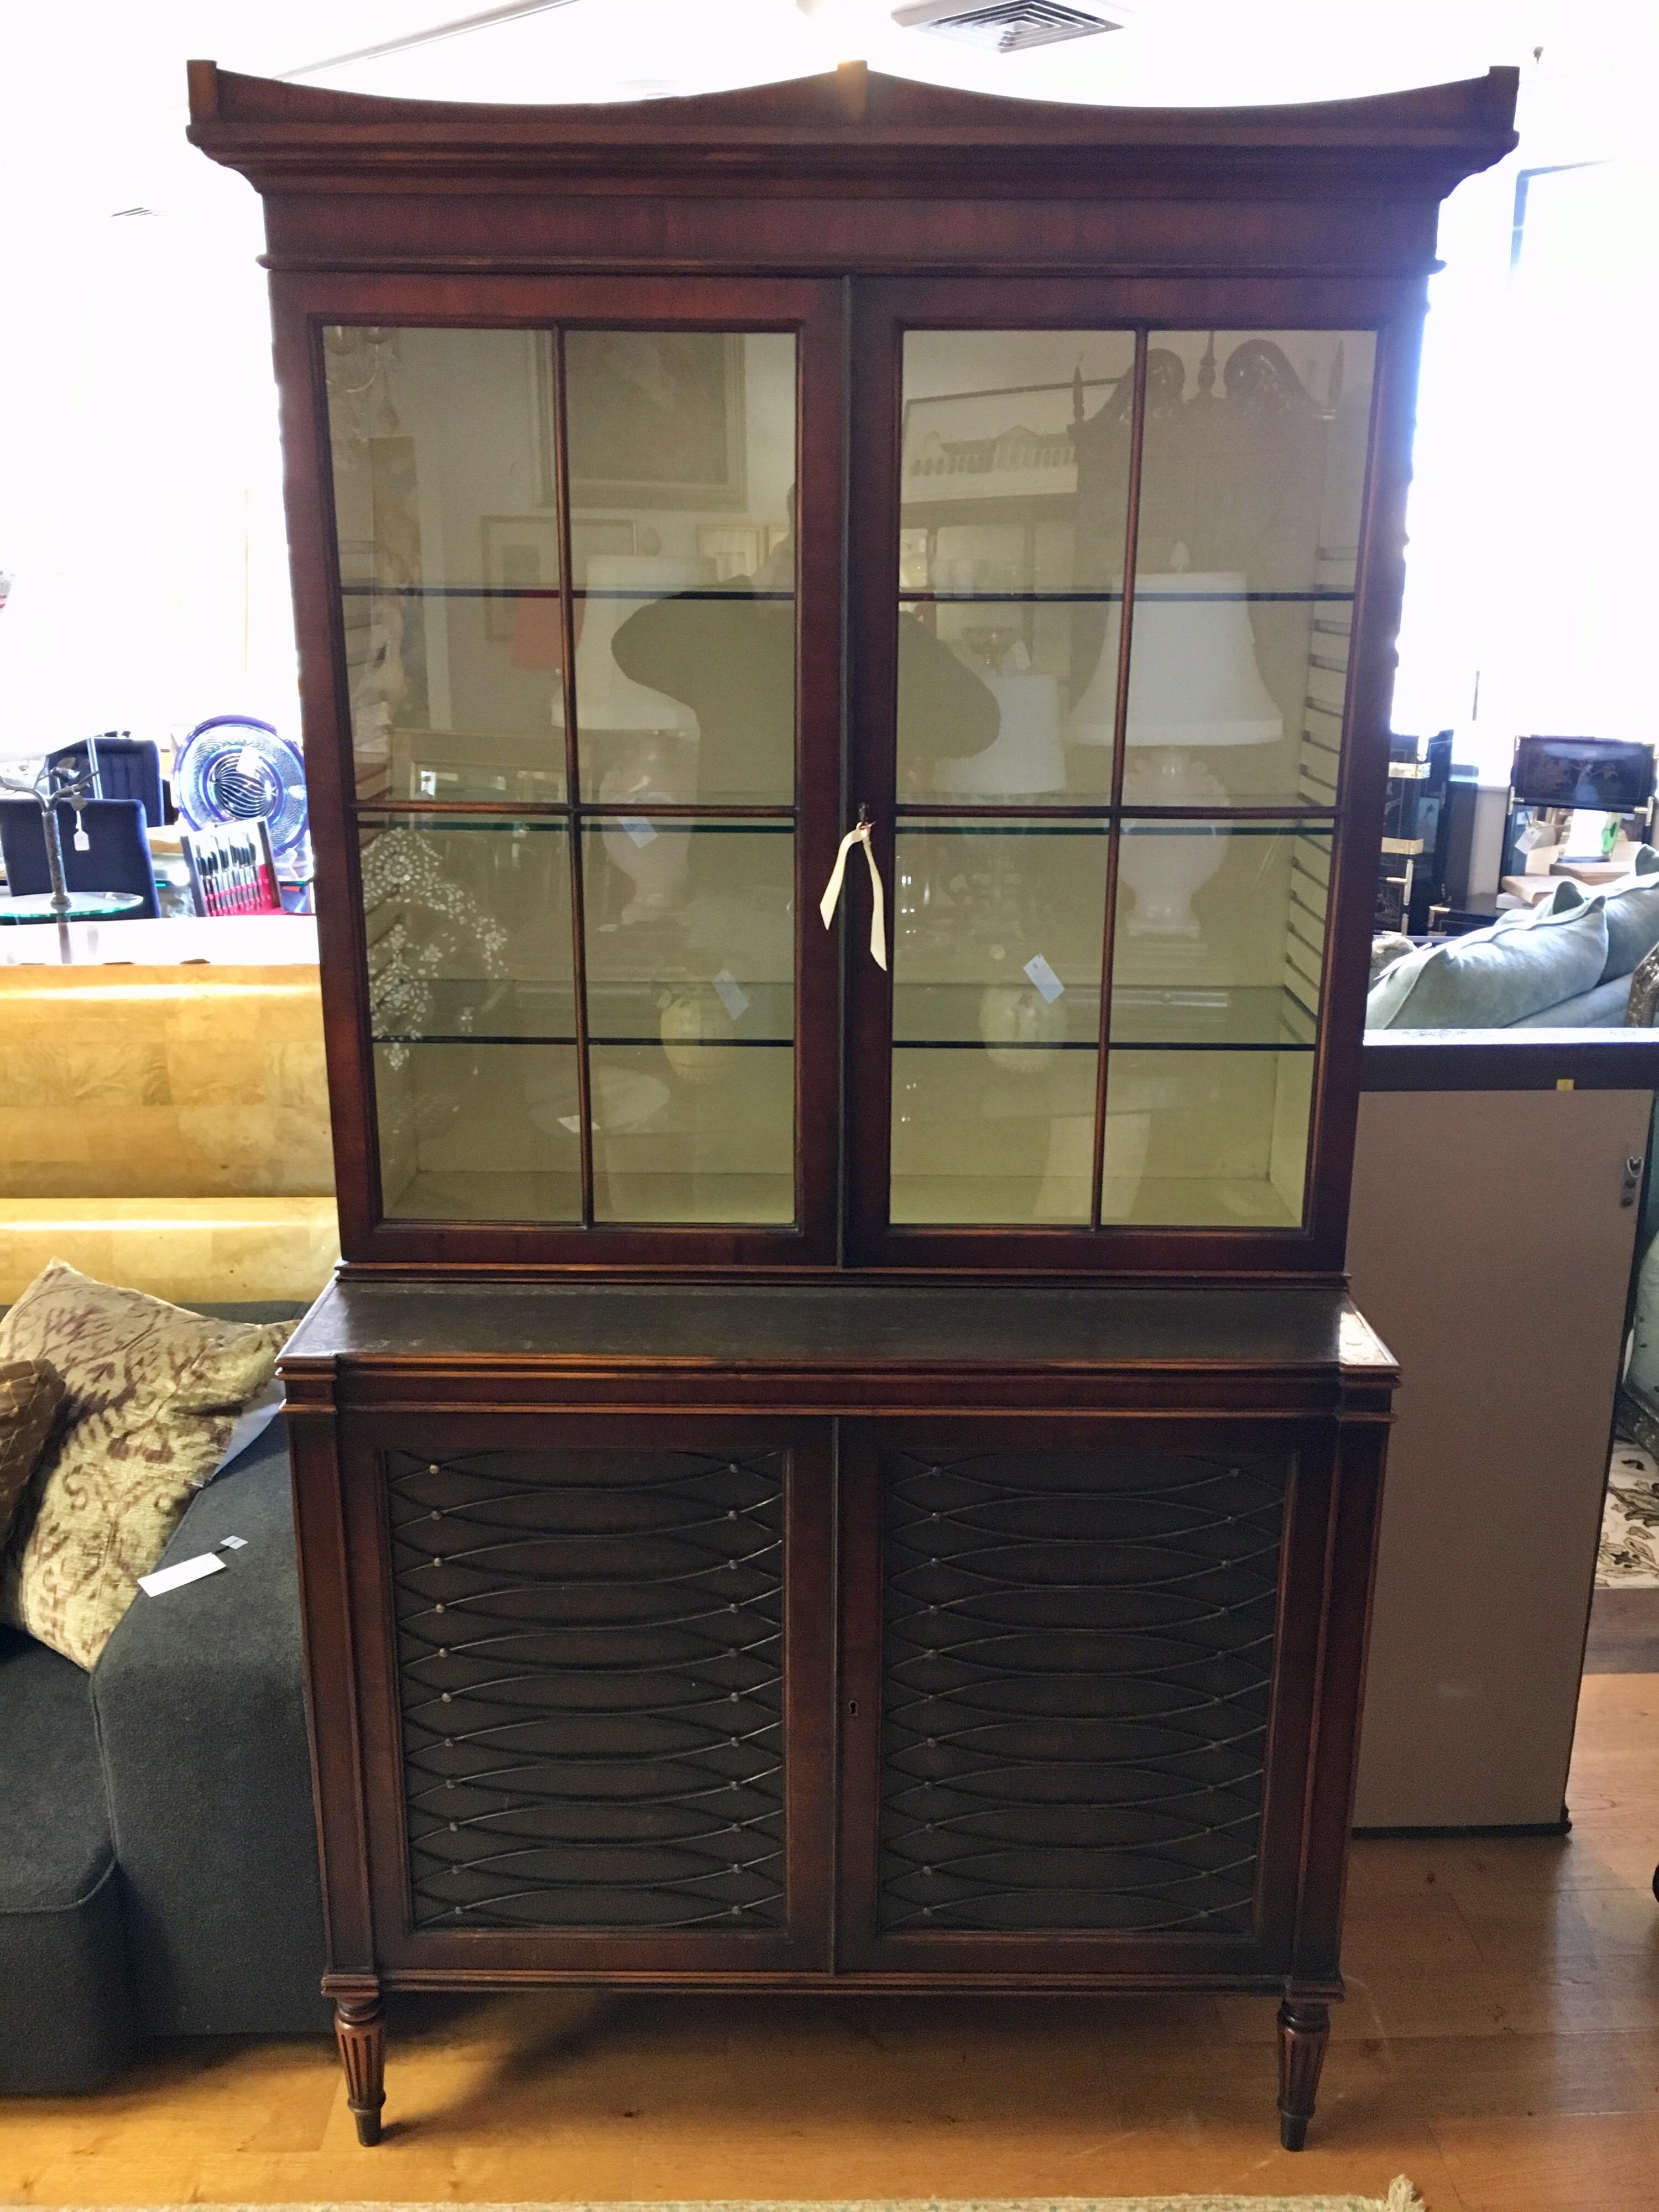 Stunning dark walnut and leather breakfront from Rinfret, Greenwich, CT. It is illuminated and features
lockable storage at top and bottom. Top has three shelves and bottom has one wooden shelf. Comes in two pieces, top and bottom, for ease of